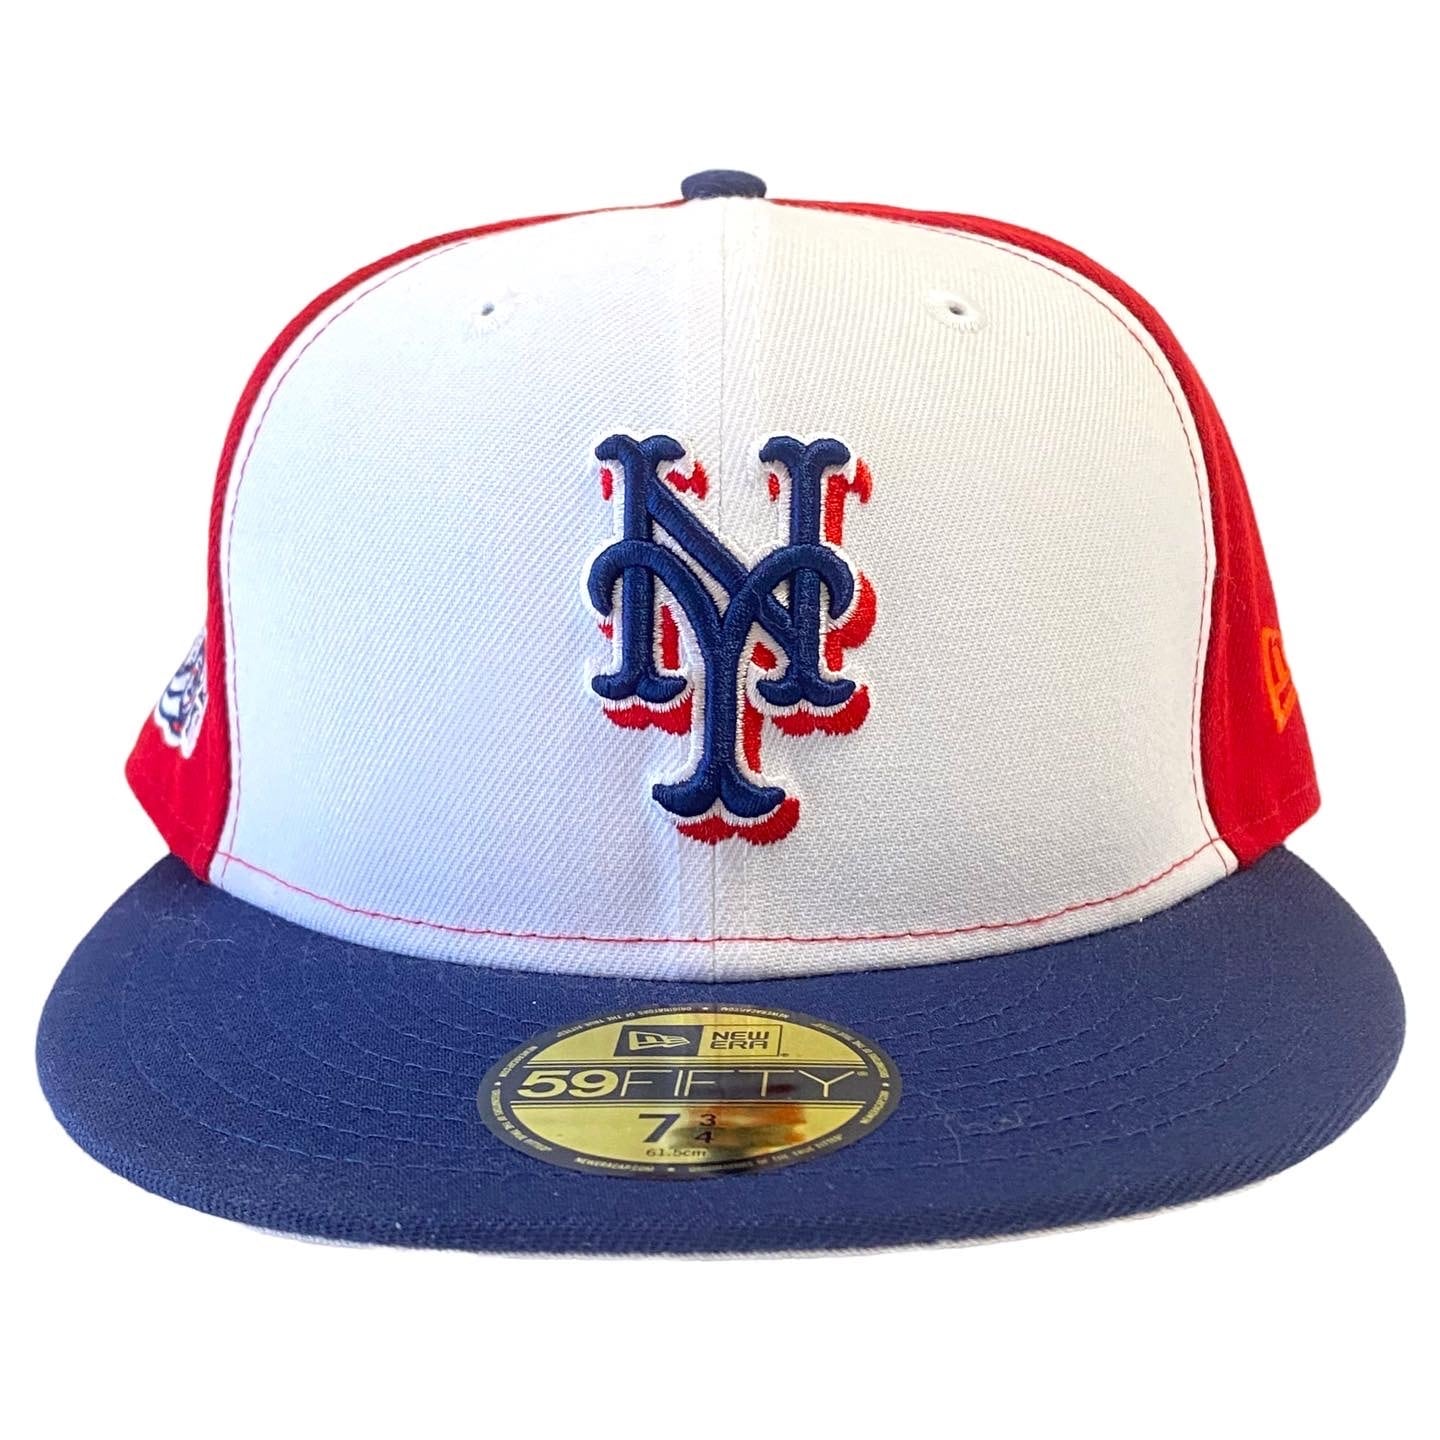 New Era 59Fifty Fitted Cap Jae Tips Limited Edition New York Mets